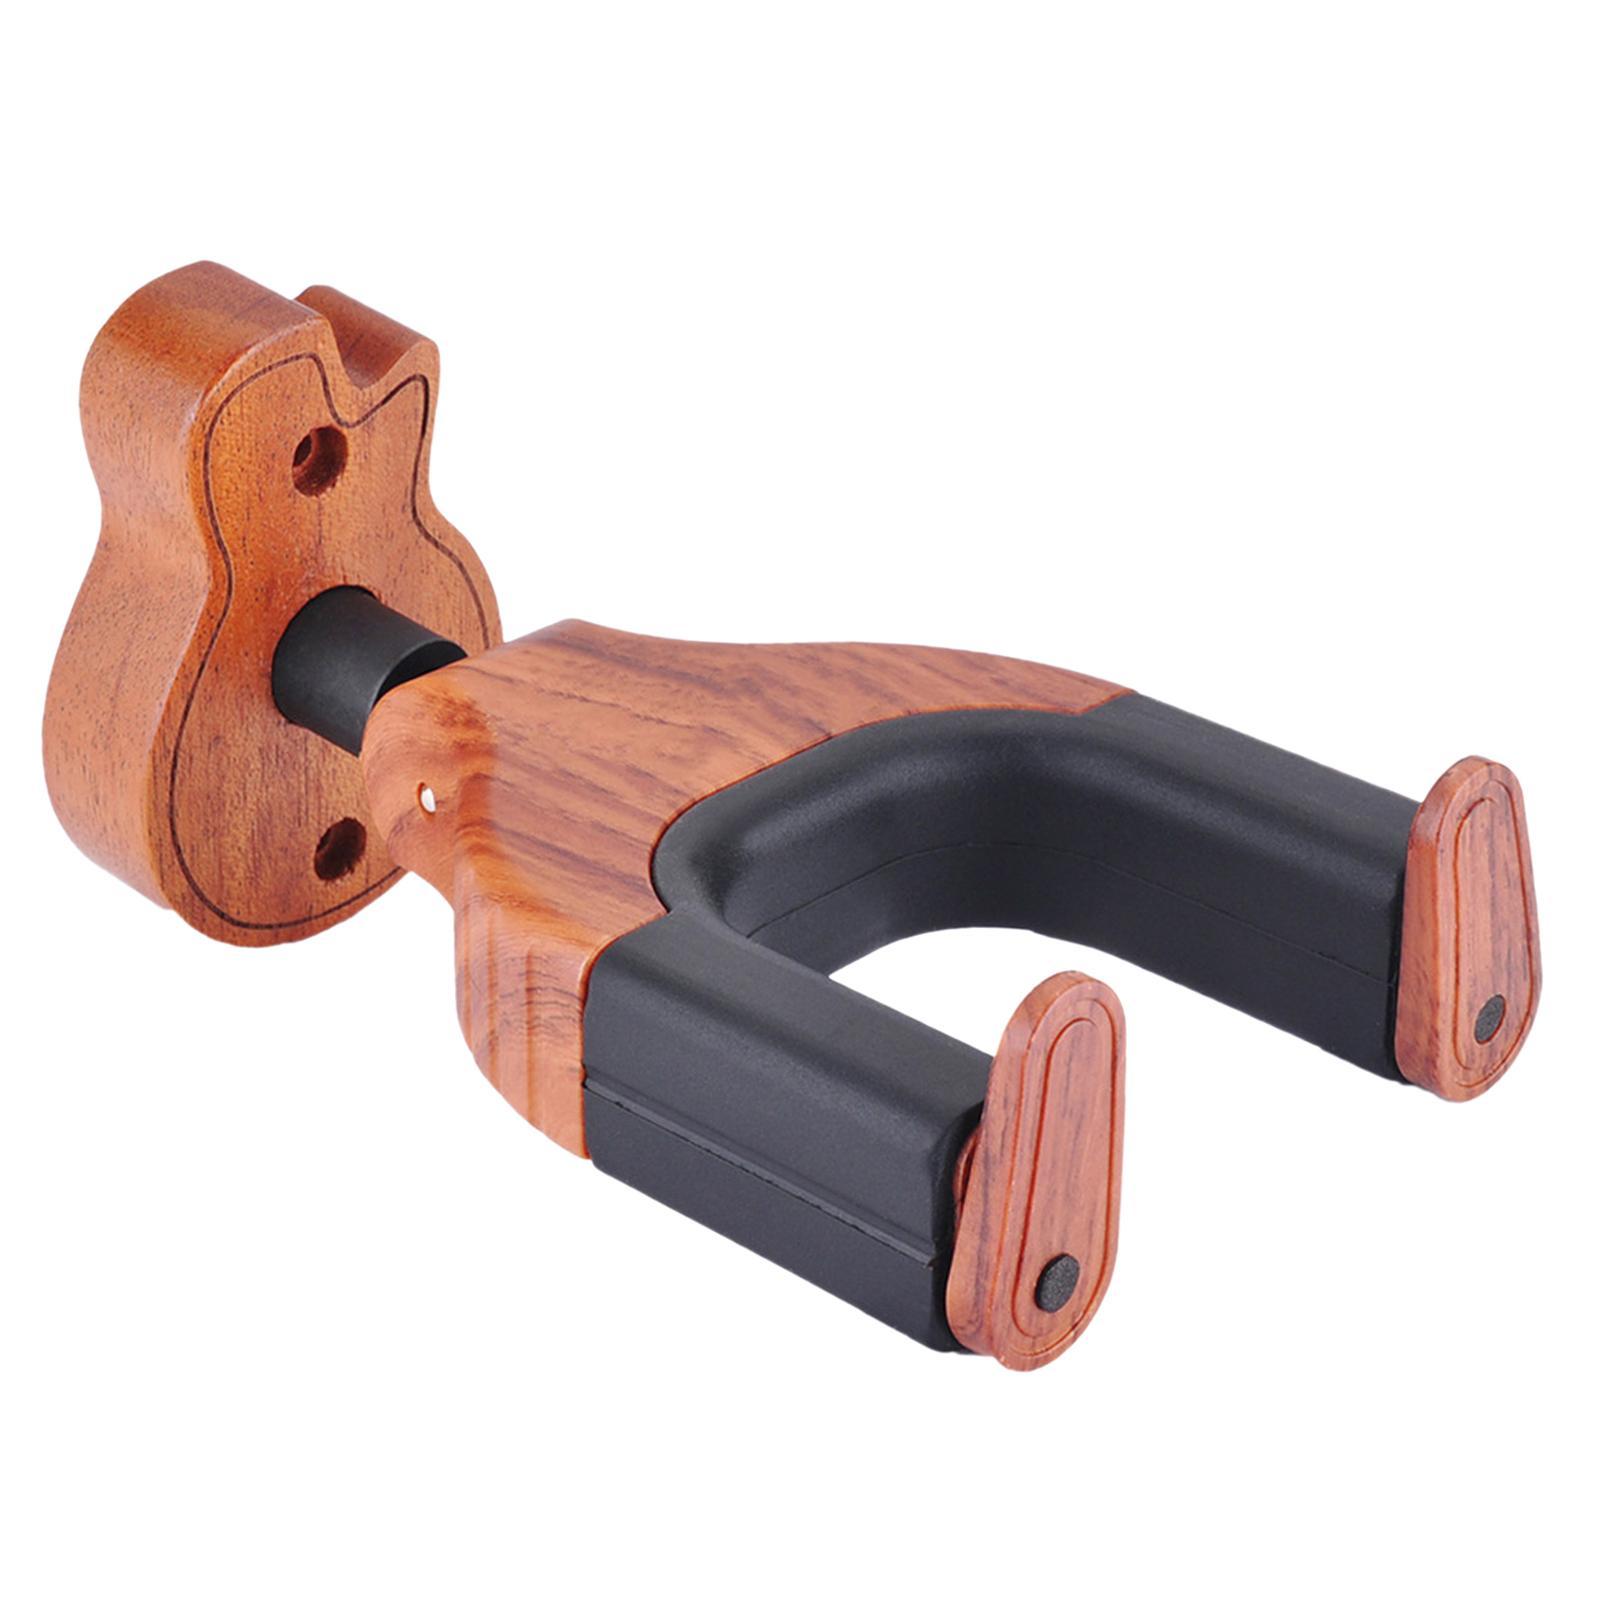 Guitar Holder, Guitar Hook, Easy to Install Guitar Support Guitar Display Professional Wood Non Slip Wall Mount Guitar Hanger, Guitar Stand